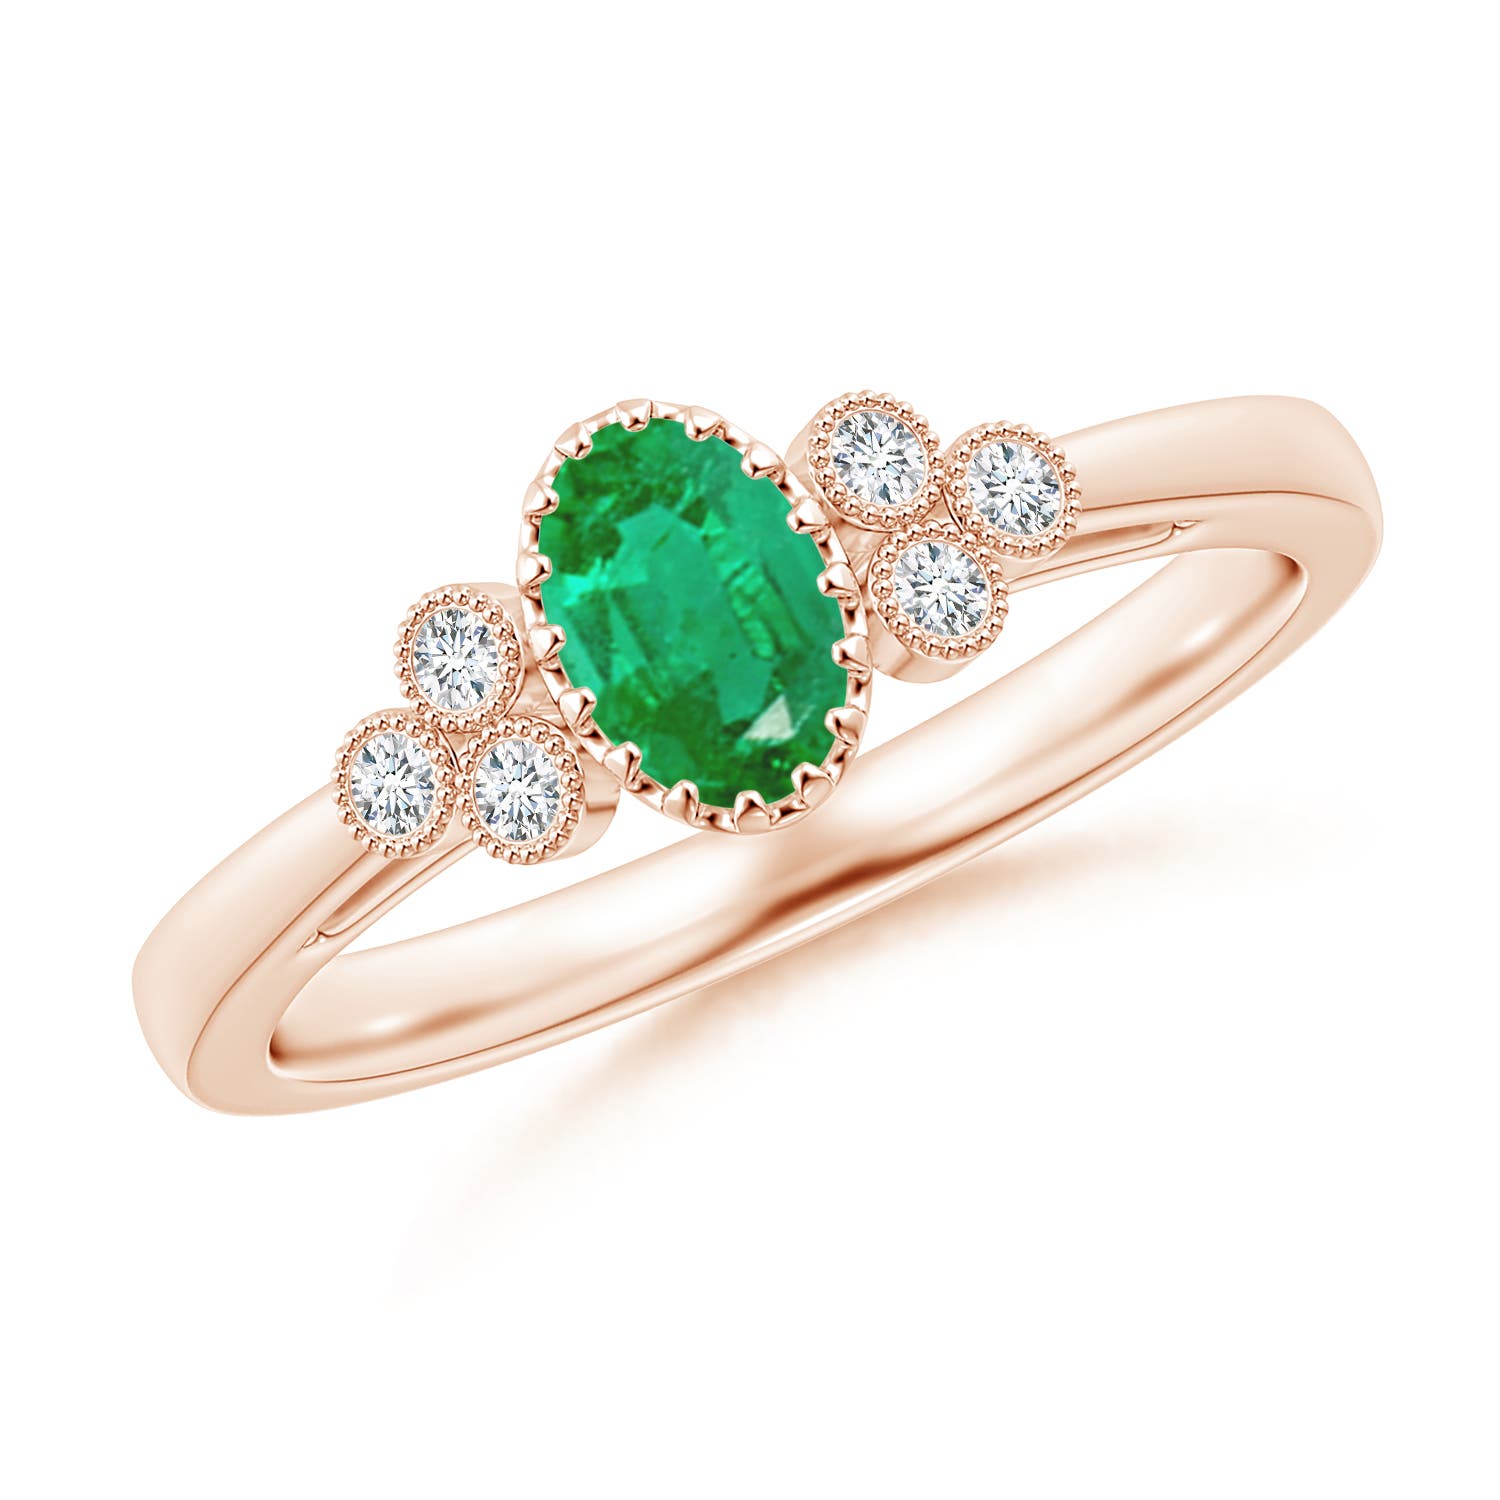 AA - Emerald / 0.48 CT / 14 KT Rose Gold